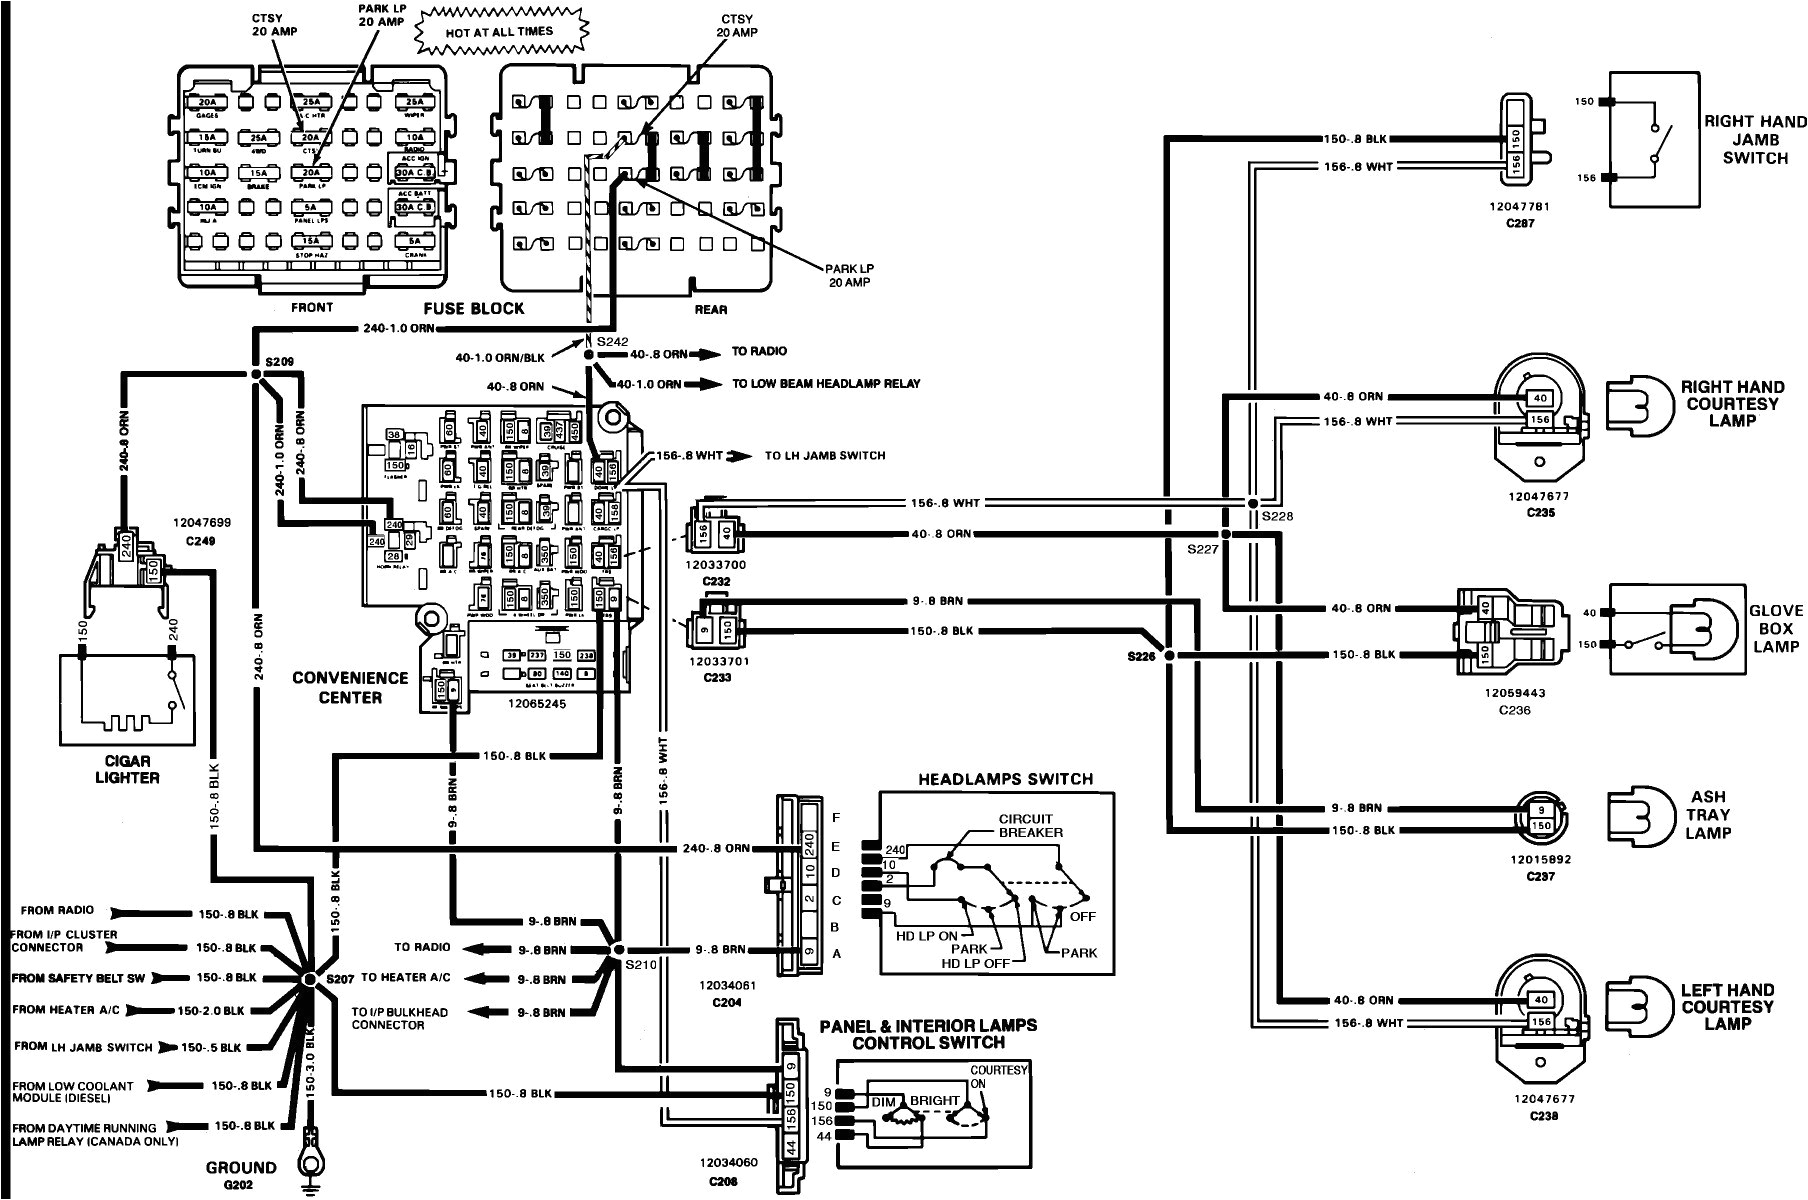 automotive wiring diagrams page 147 of 301 wiring diagrams data diagrams archives page 94 of 301 automotive wiring diagrams